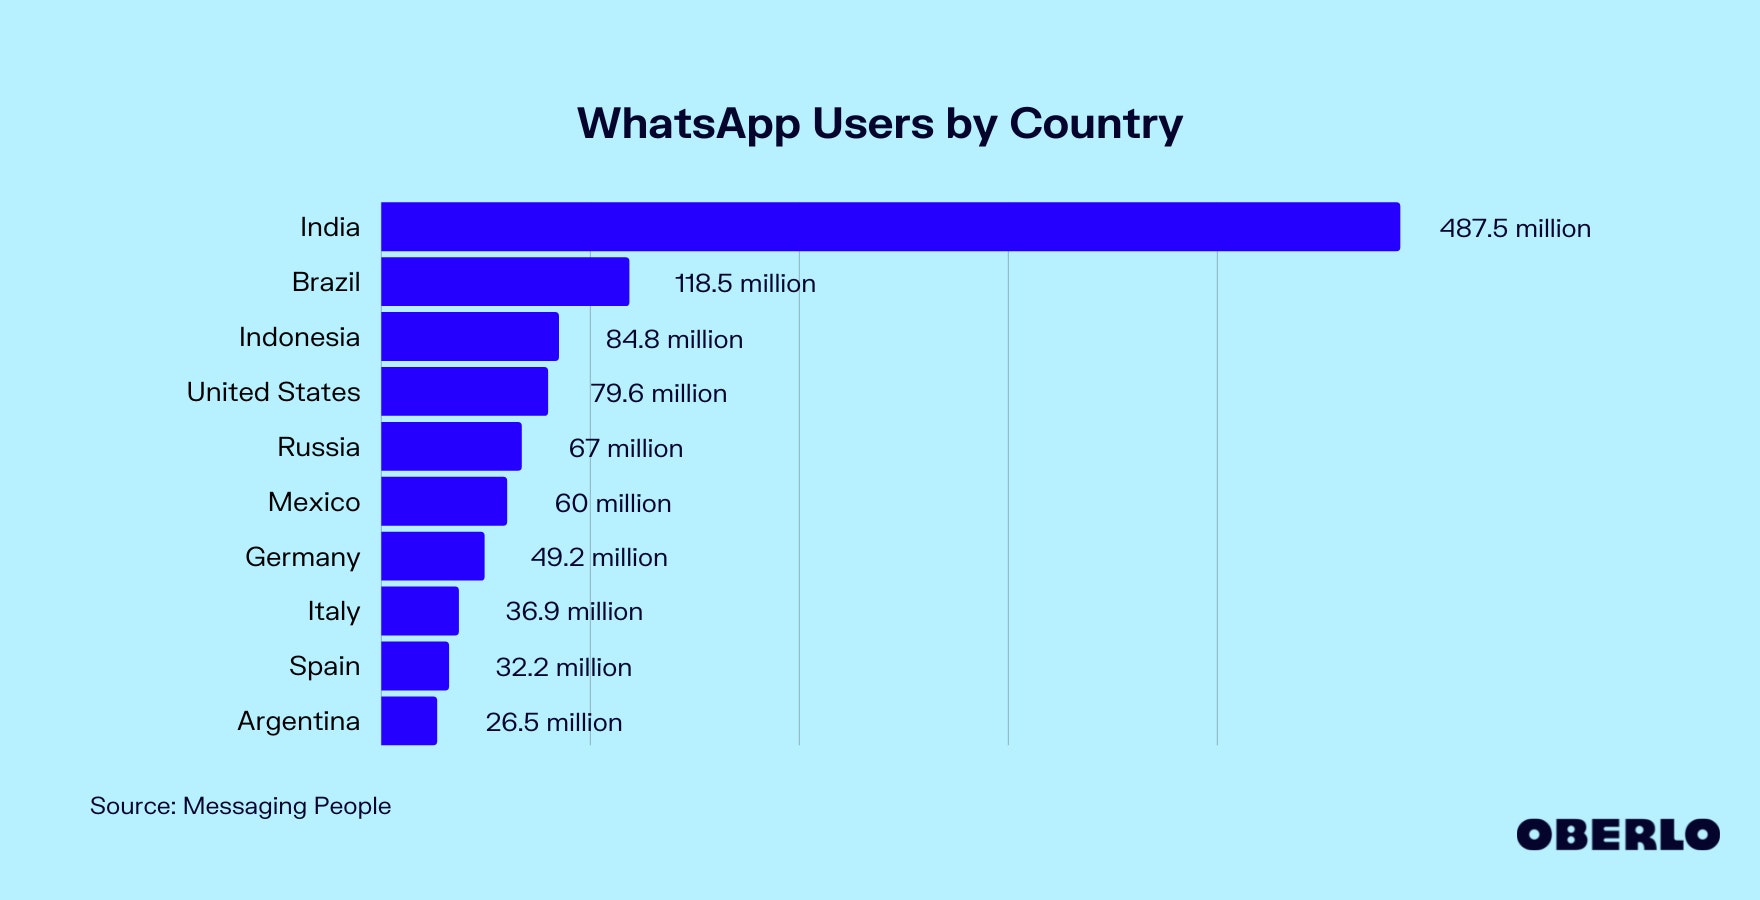 Chart showing WhatsApp Users by Country